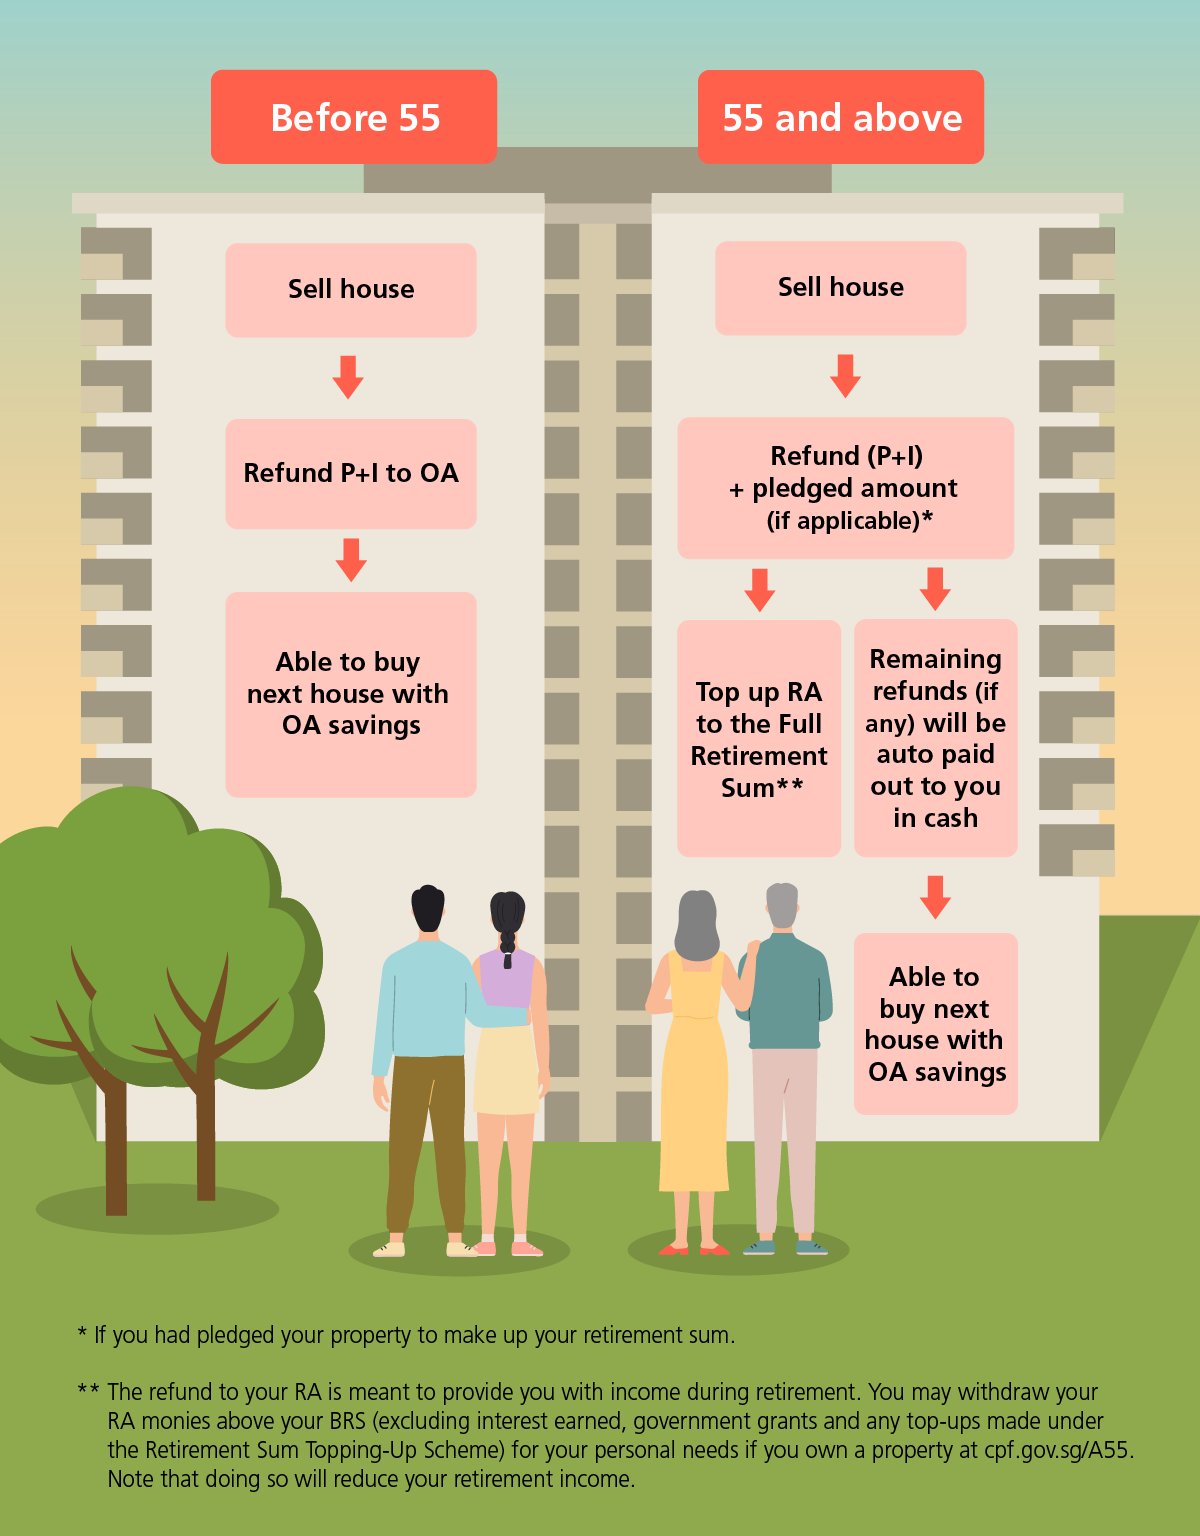 Sale of apartment before and after 55 